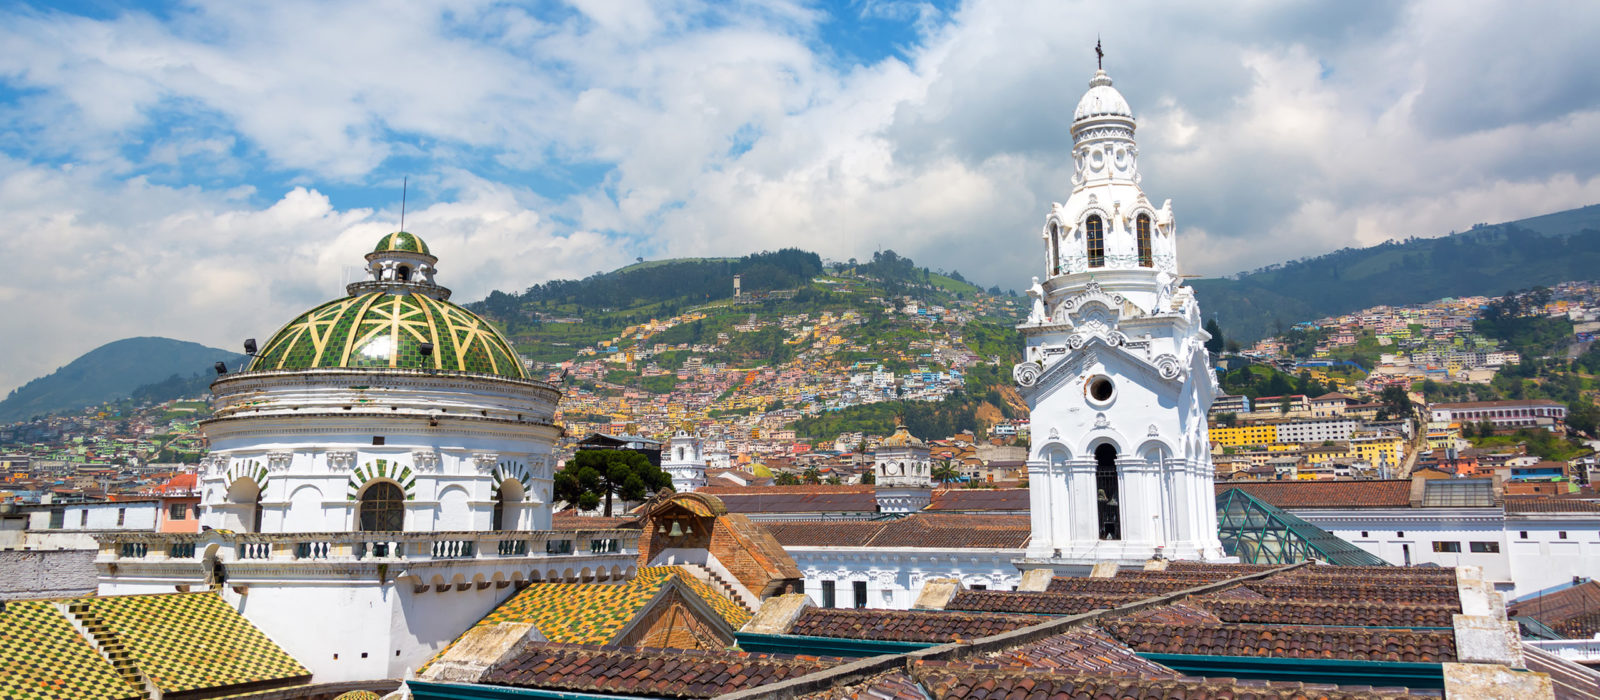 View from the roof of the cathedral with populated hills visible in the background in the historic colonial center of Quito, Ecuador